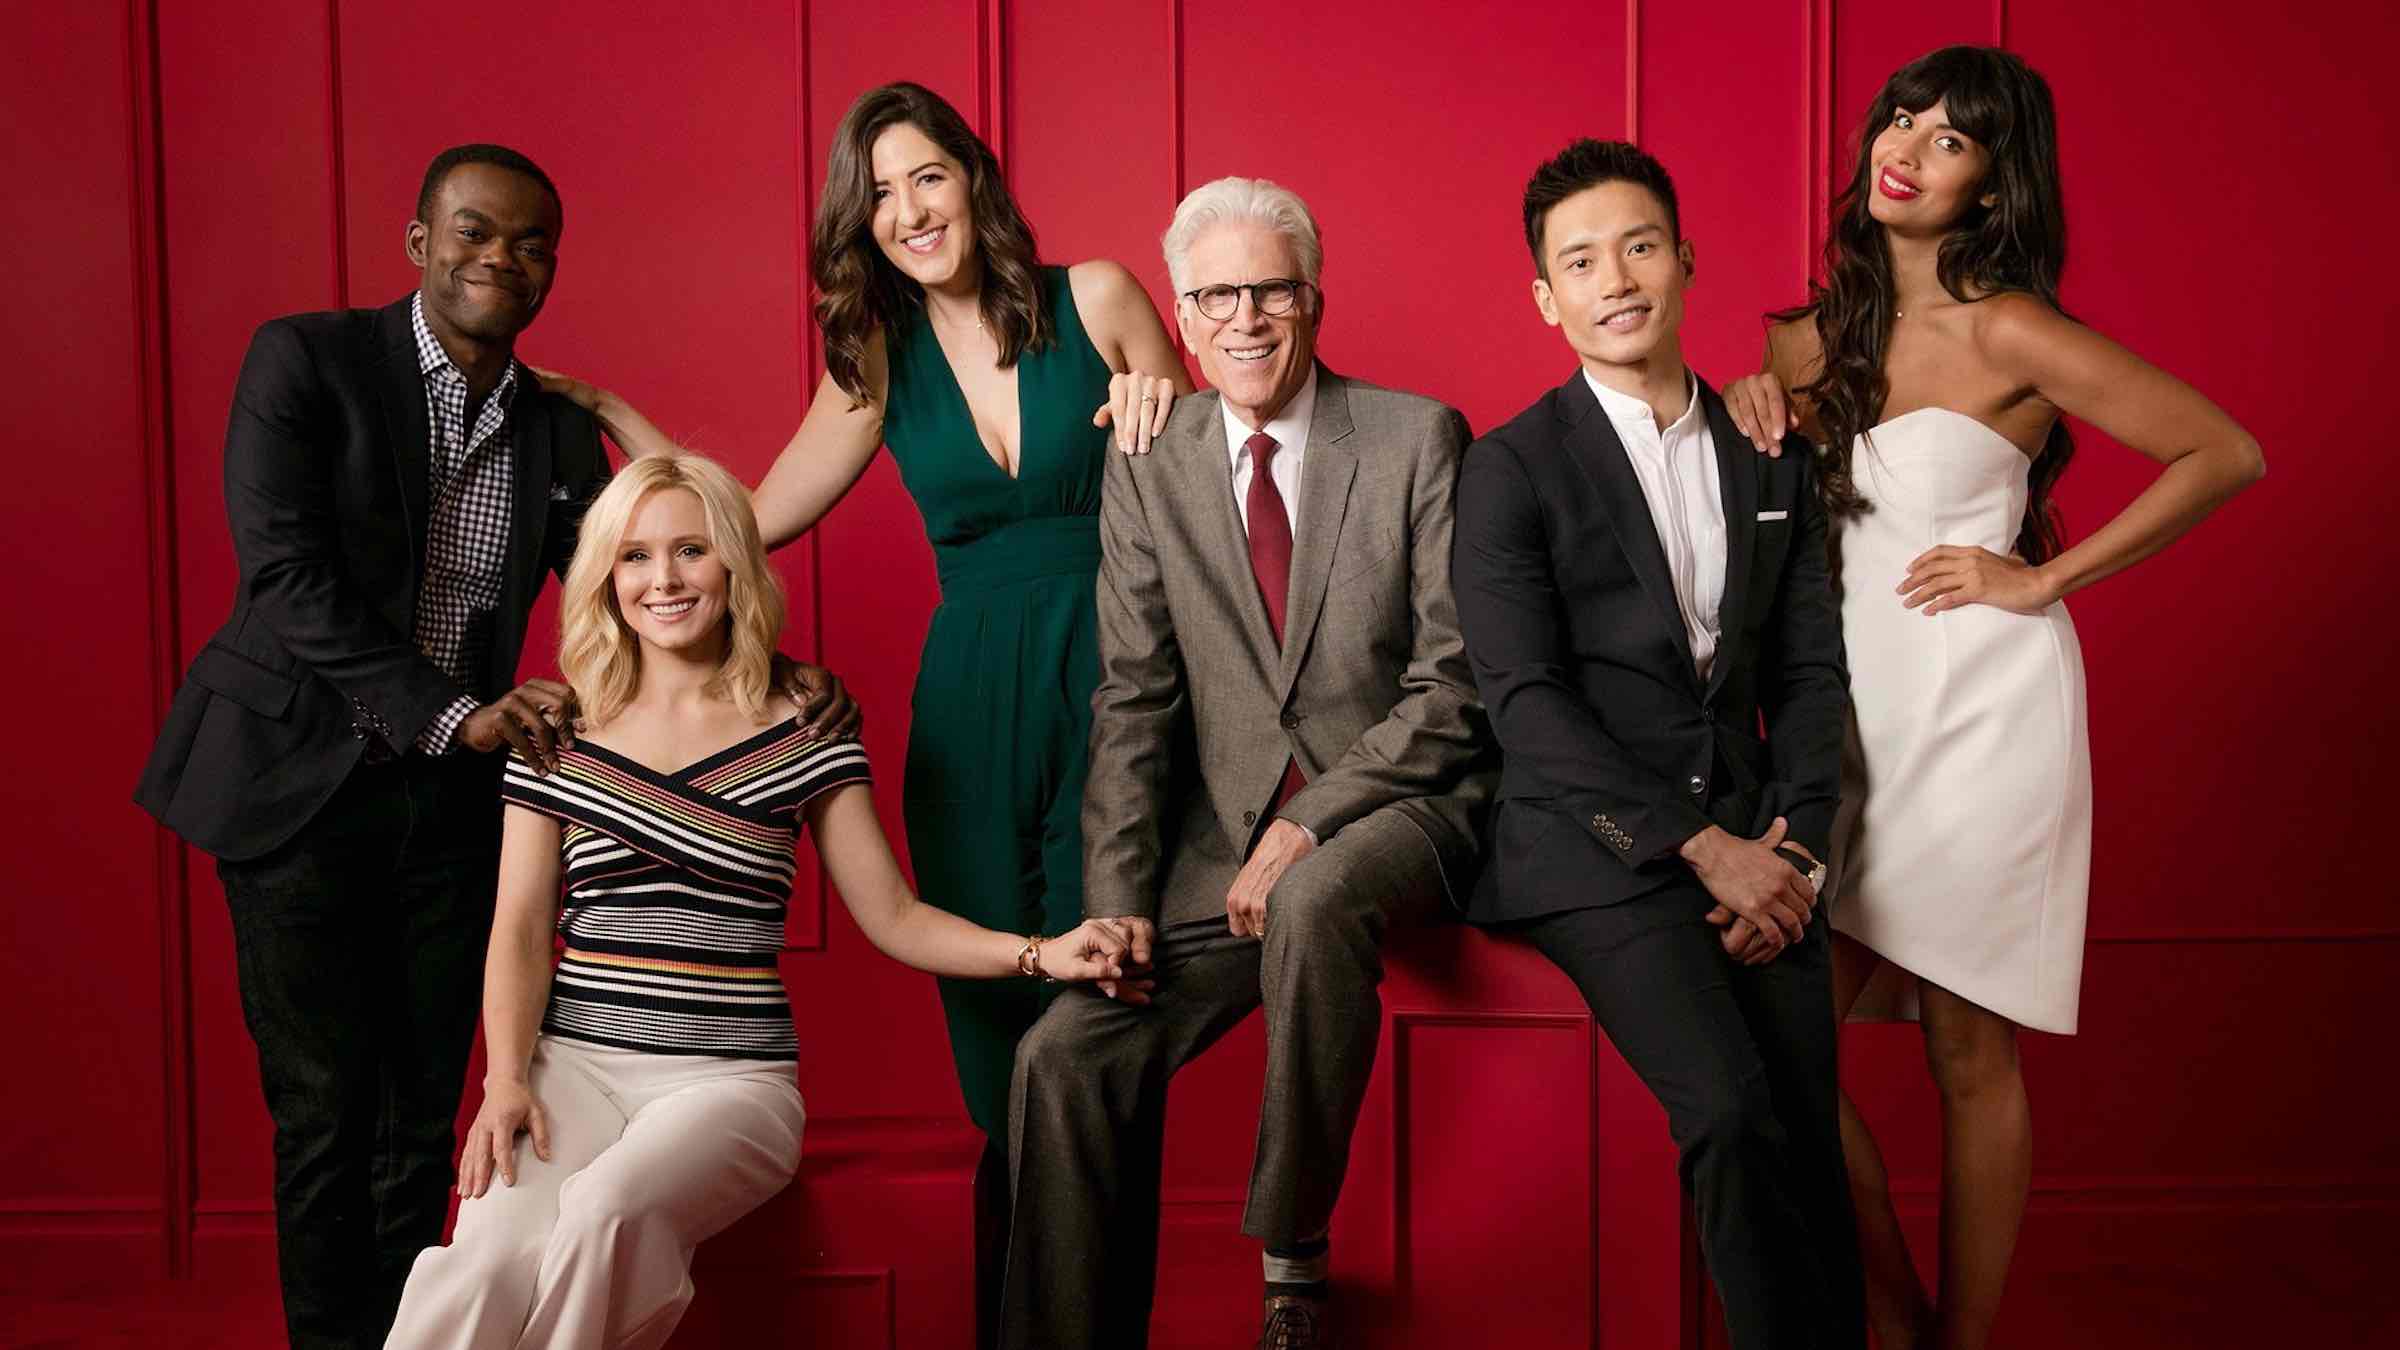 Catch 'The Good Place' gang in their latest season 4 adventure. What will happen to Janet? Will Jason and Michael survive the Bad Place? Let's find out.